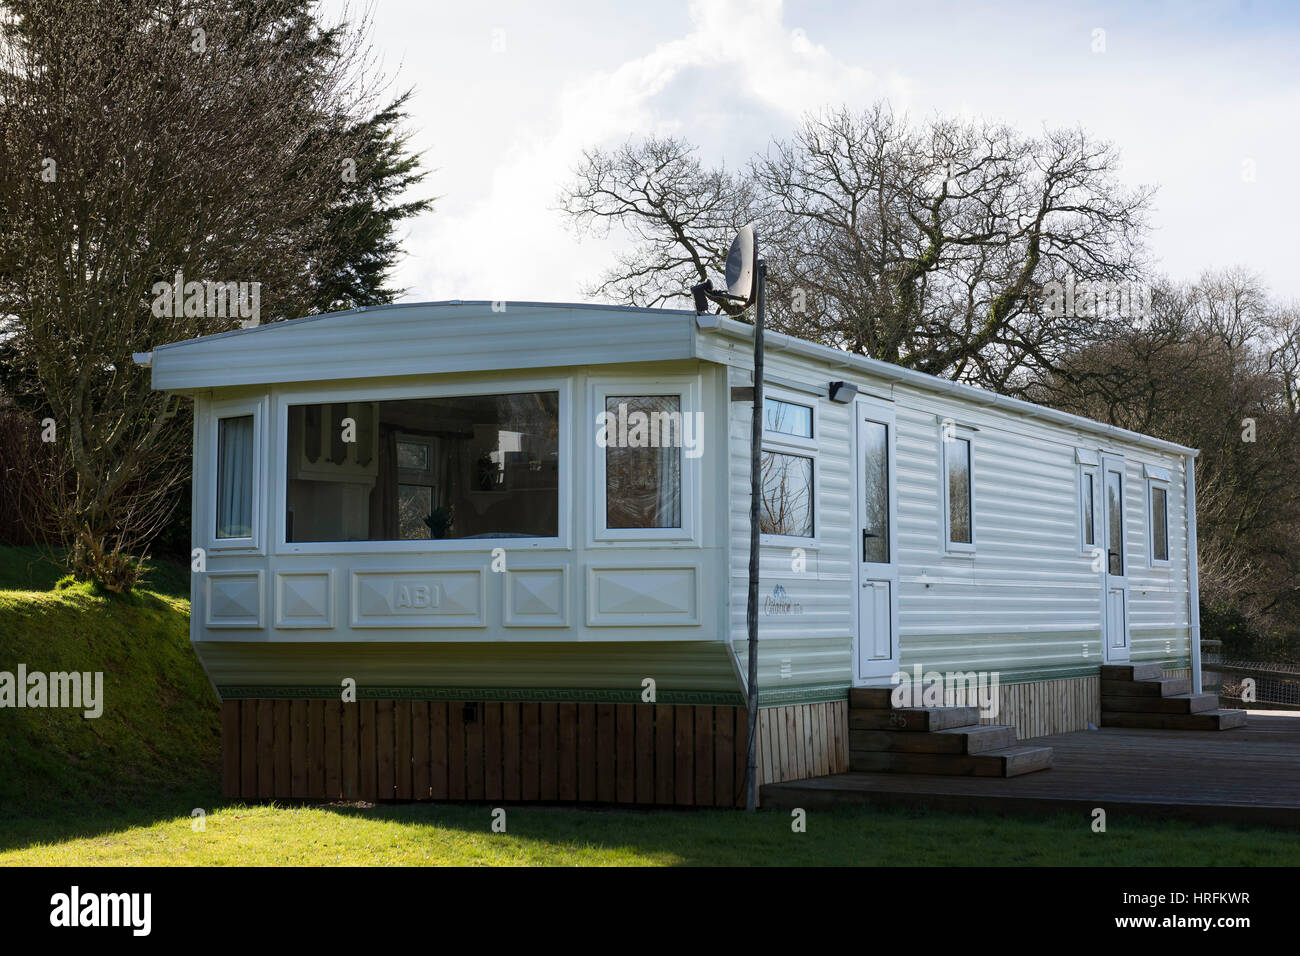 Static Caravan High Resolution Stock Photography And Images Alamy See more ideas about luxury caravans, luxury rv, luxury. https www alamy com stock photo a static caravan holiday home in west wales uk 134954563 html